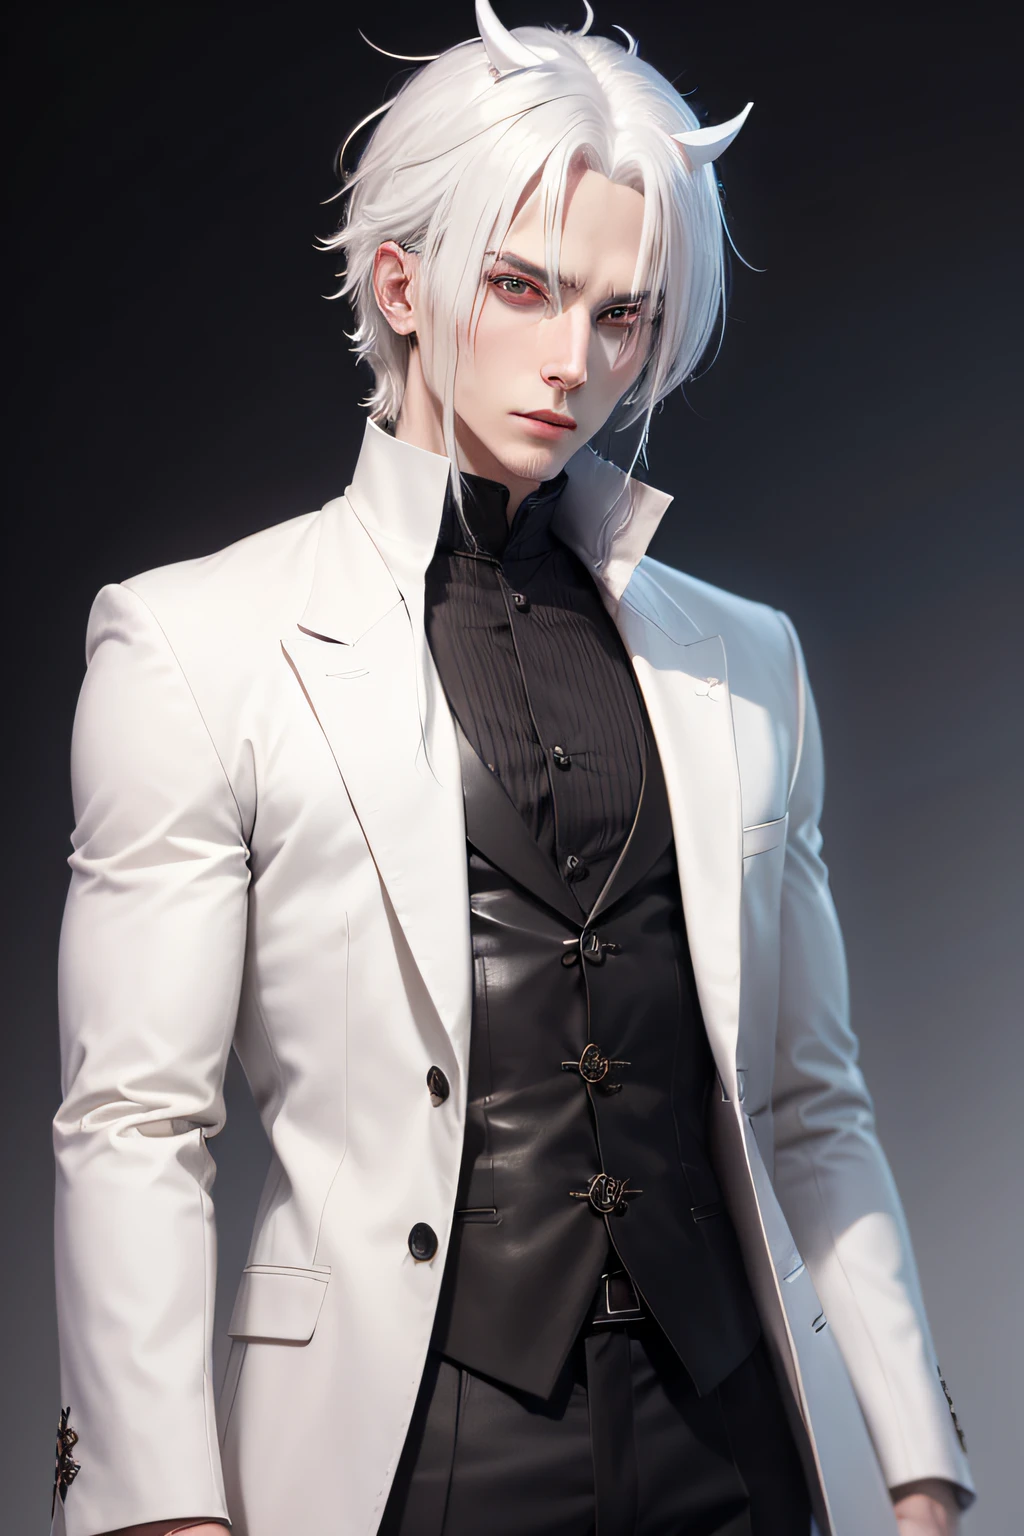 white-haired male demon with human features and clothing